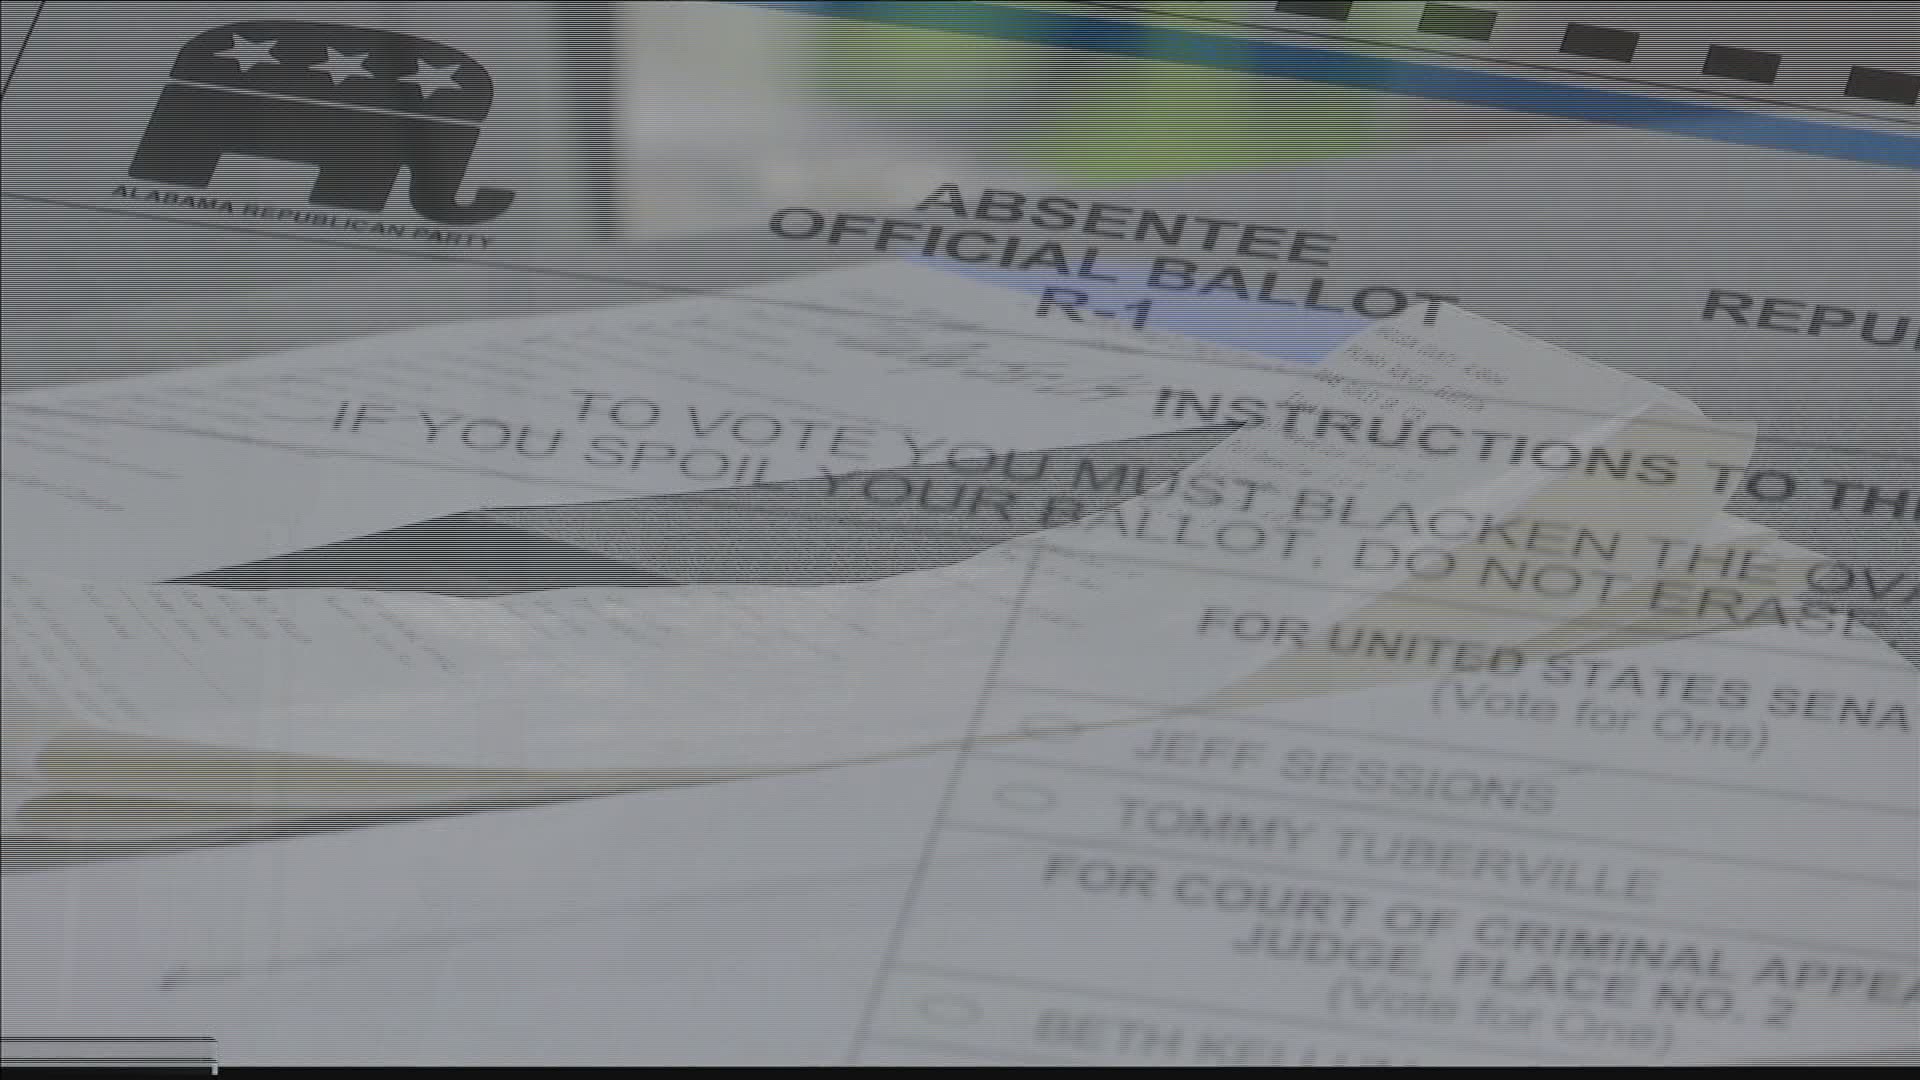 The Secretary of State's Office extends absentee ballot opportunity over COVID-19 concerns